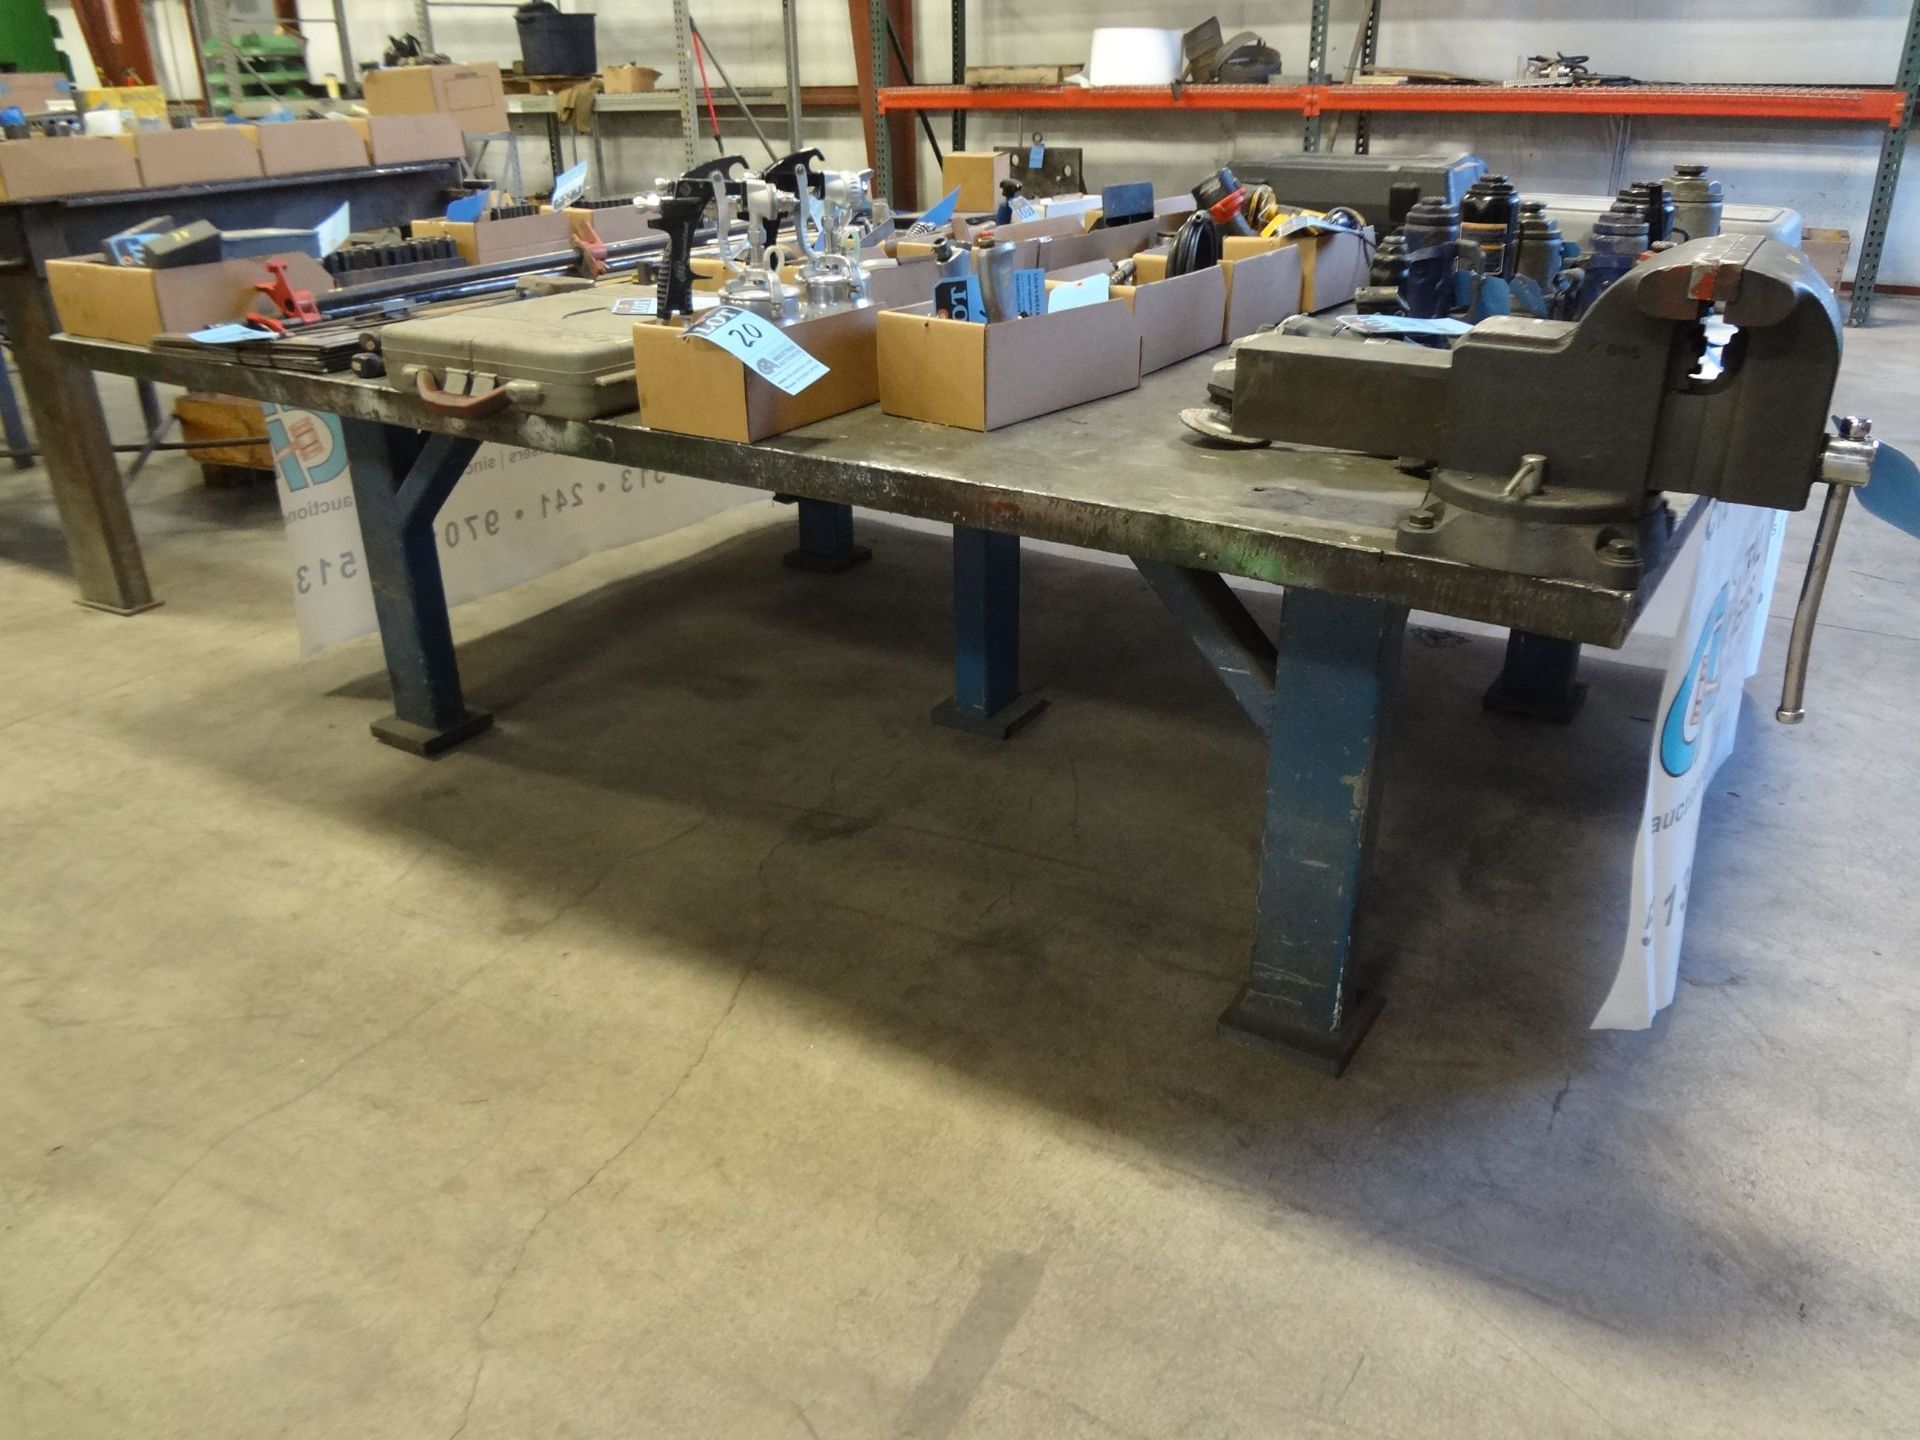 7' X 8' HEAVY DUTY WELDING TABLE WITH 6" WILTON BENCH VISE